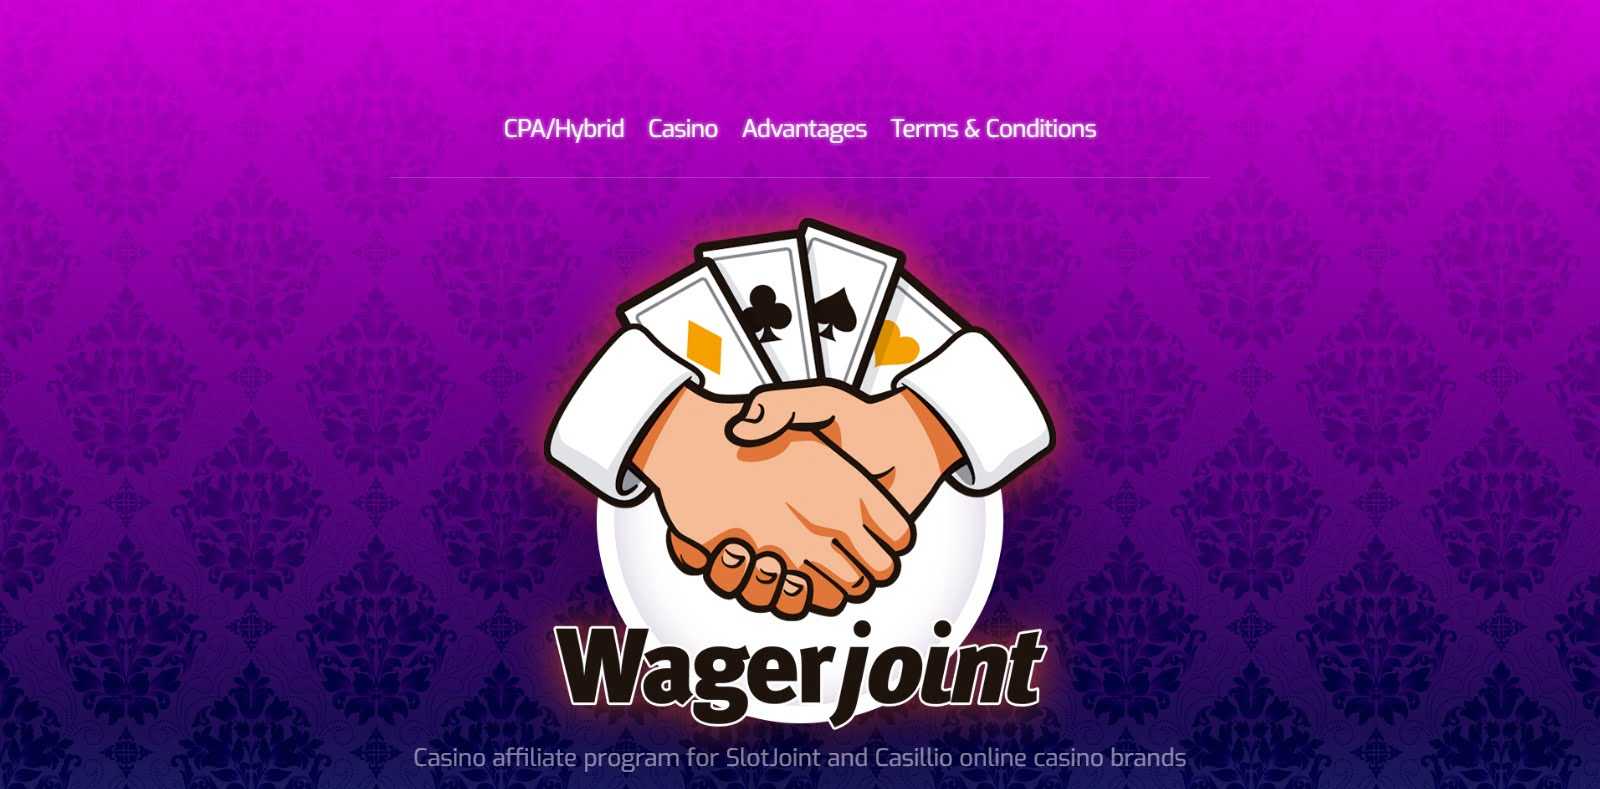 WagerJoint Affiliates Program Review: 50% Revshare for the 1st 30 Days